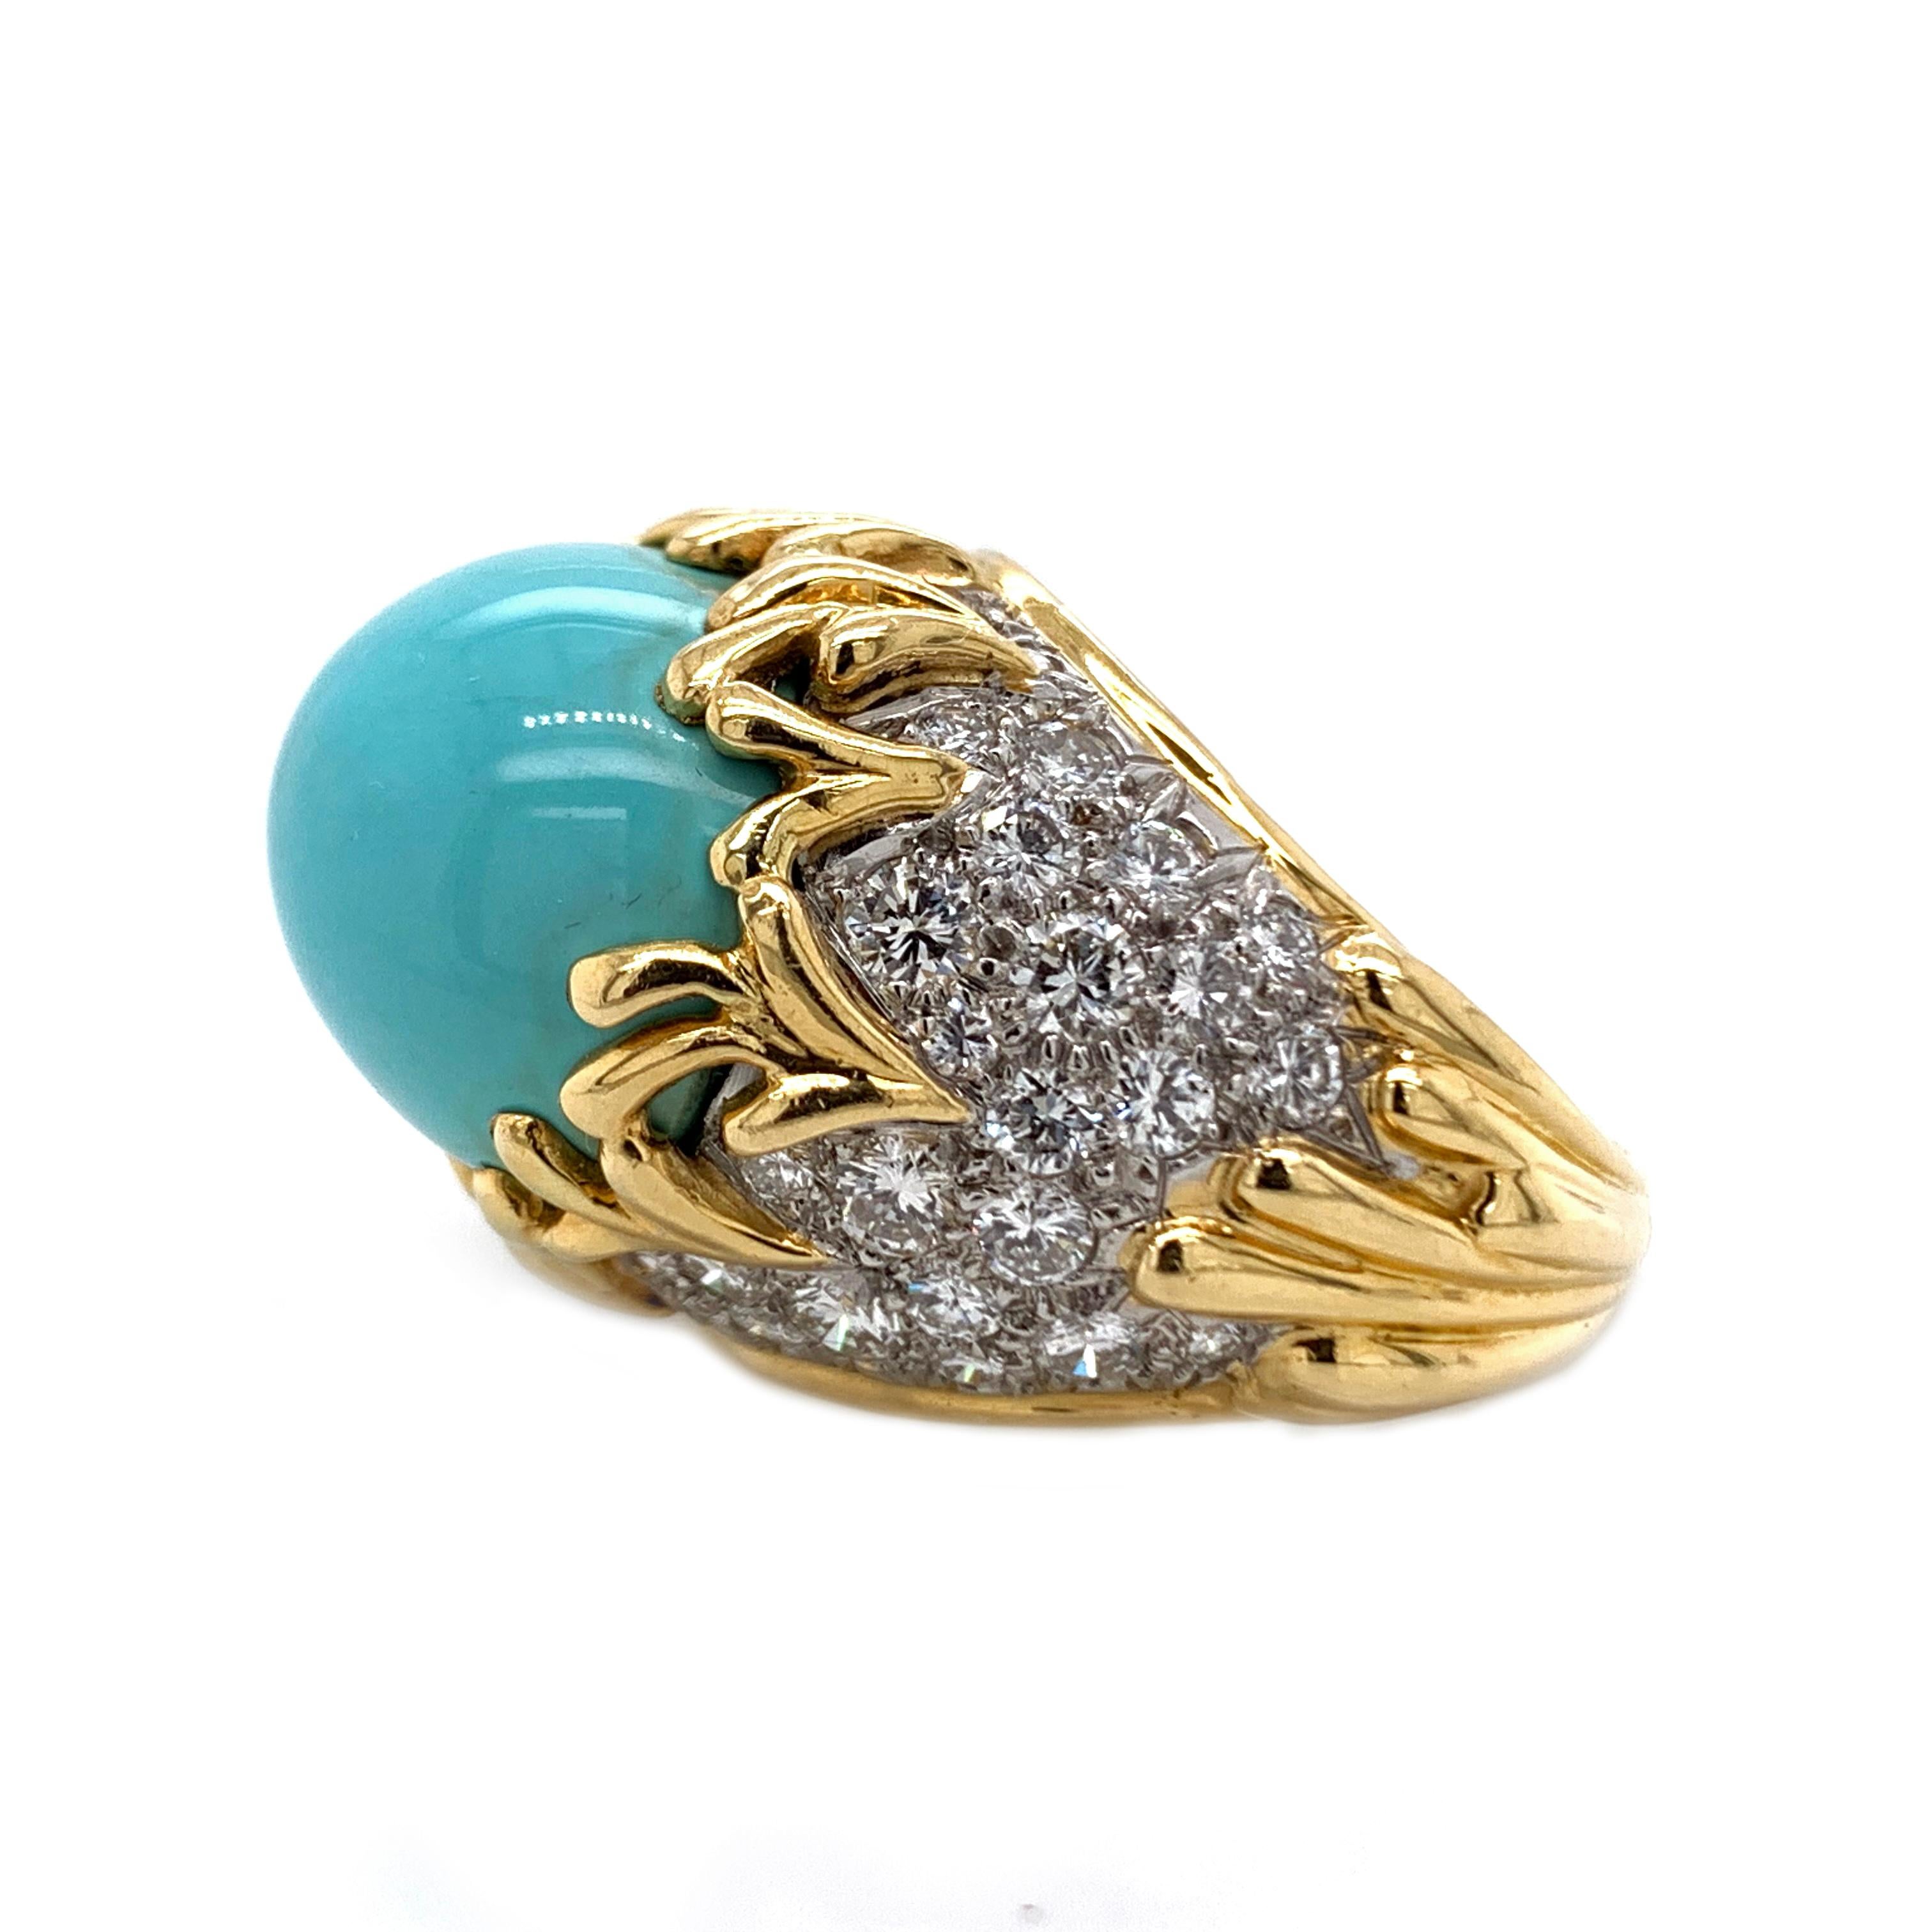 A, gorgeous 18kt yellow gold diamond and turquoise ring. In, a 18kt yellow gold polished finish. This is a US ring size 7.25 and weighs 25 grams. To, compliment the beautiful turquoise the ring is surrounded by beautiful round sparkling diamonds.